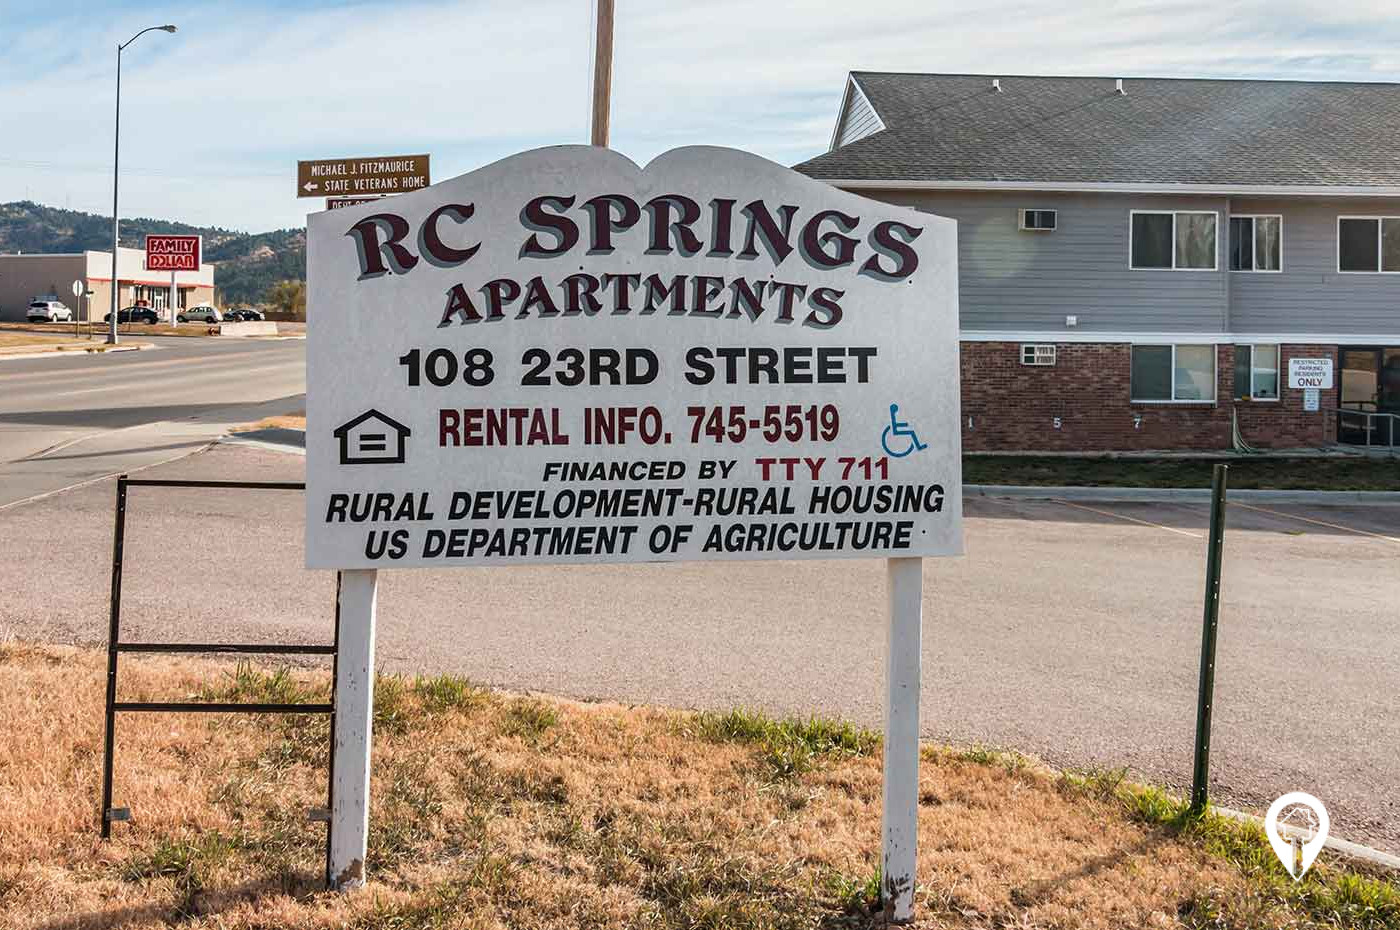 RC Springs Apartments